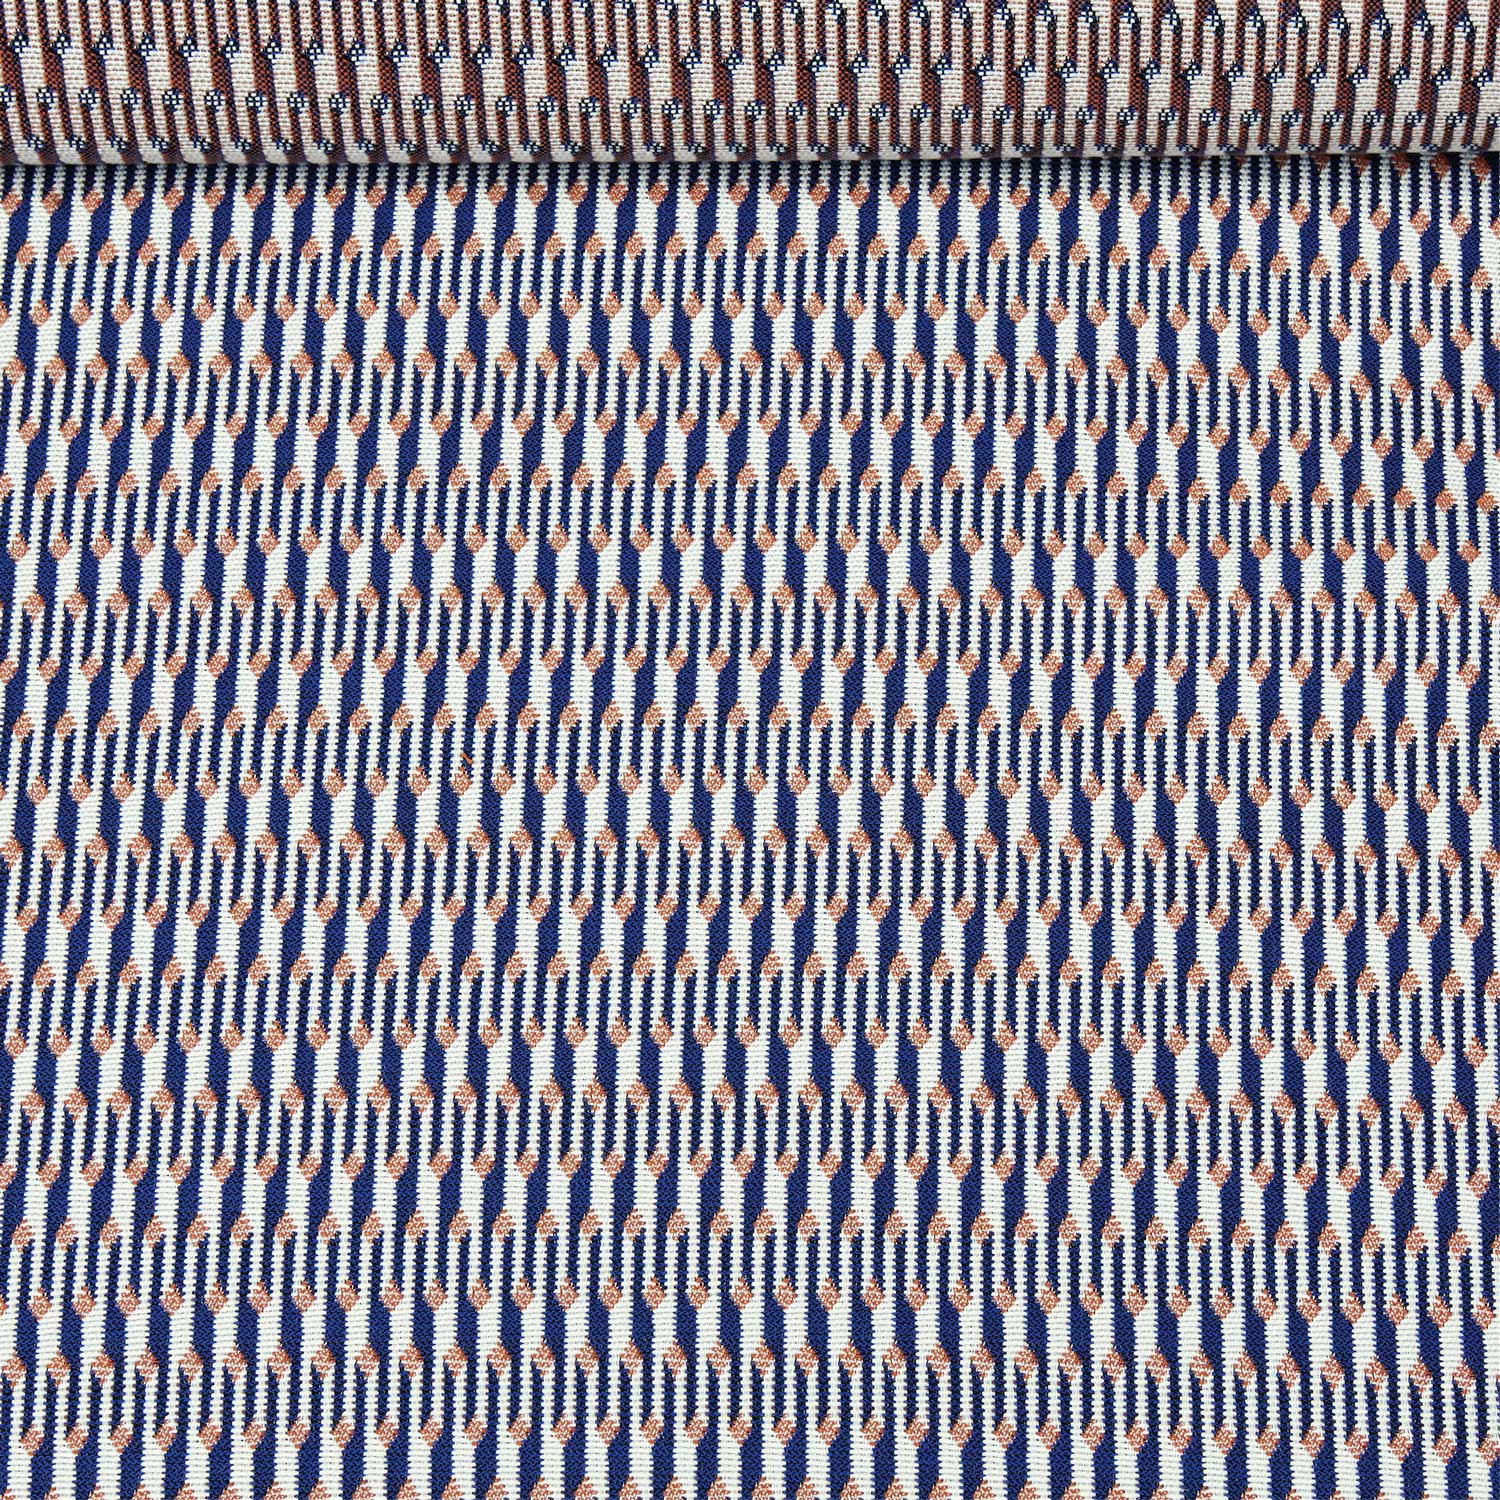 A birds eye view of a jacquard woven white, blue and orange pattern outdoor performance fabric roll. 